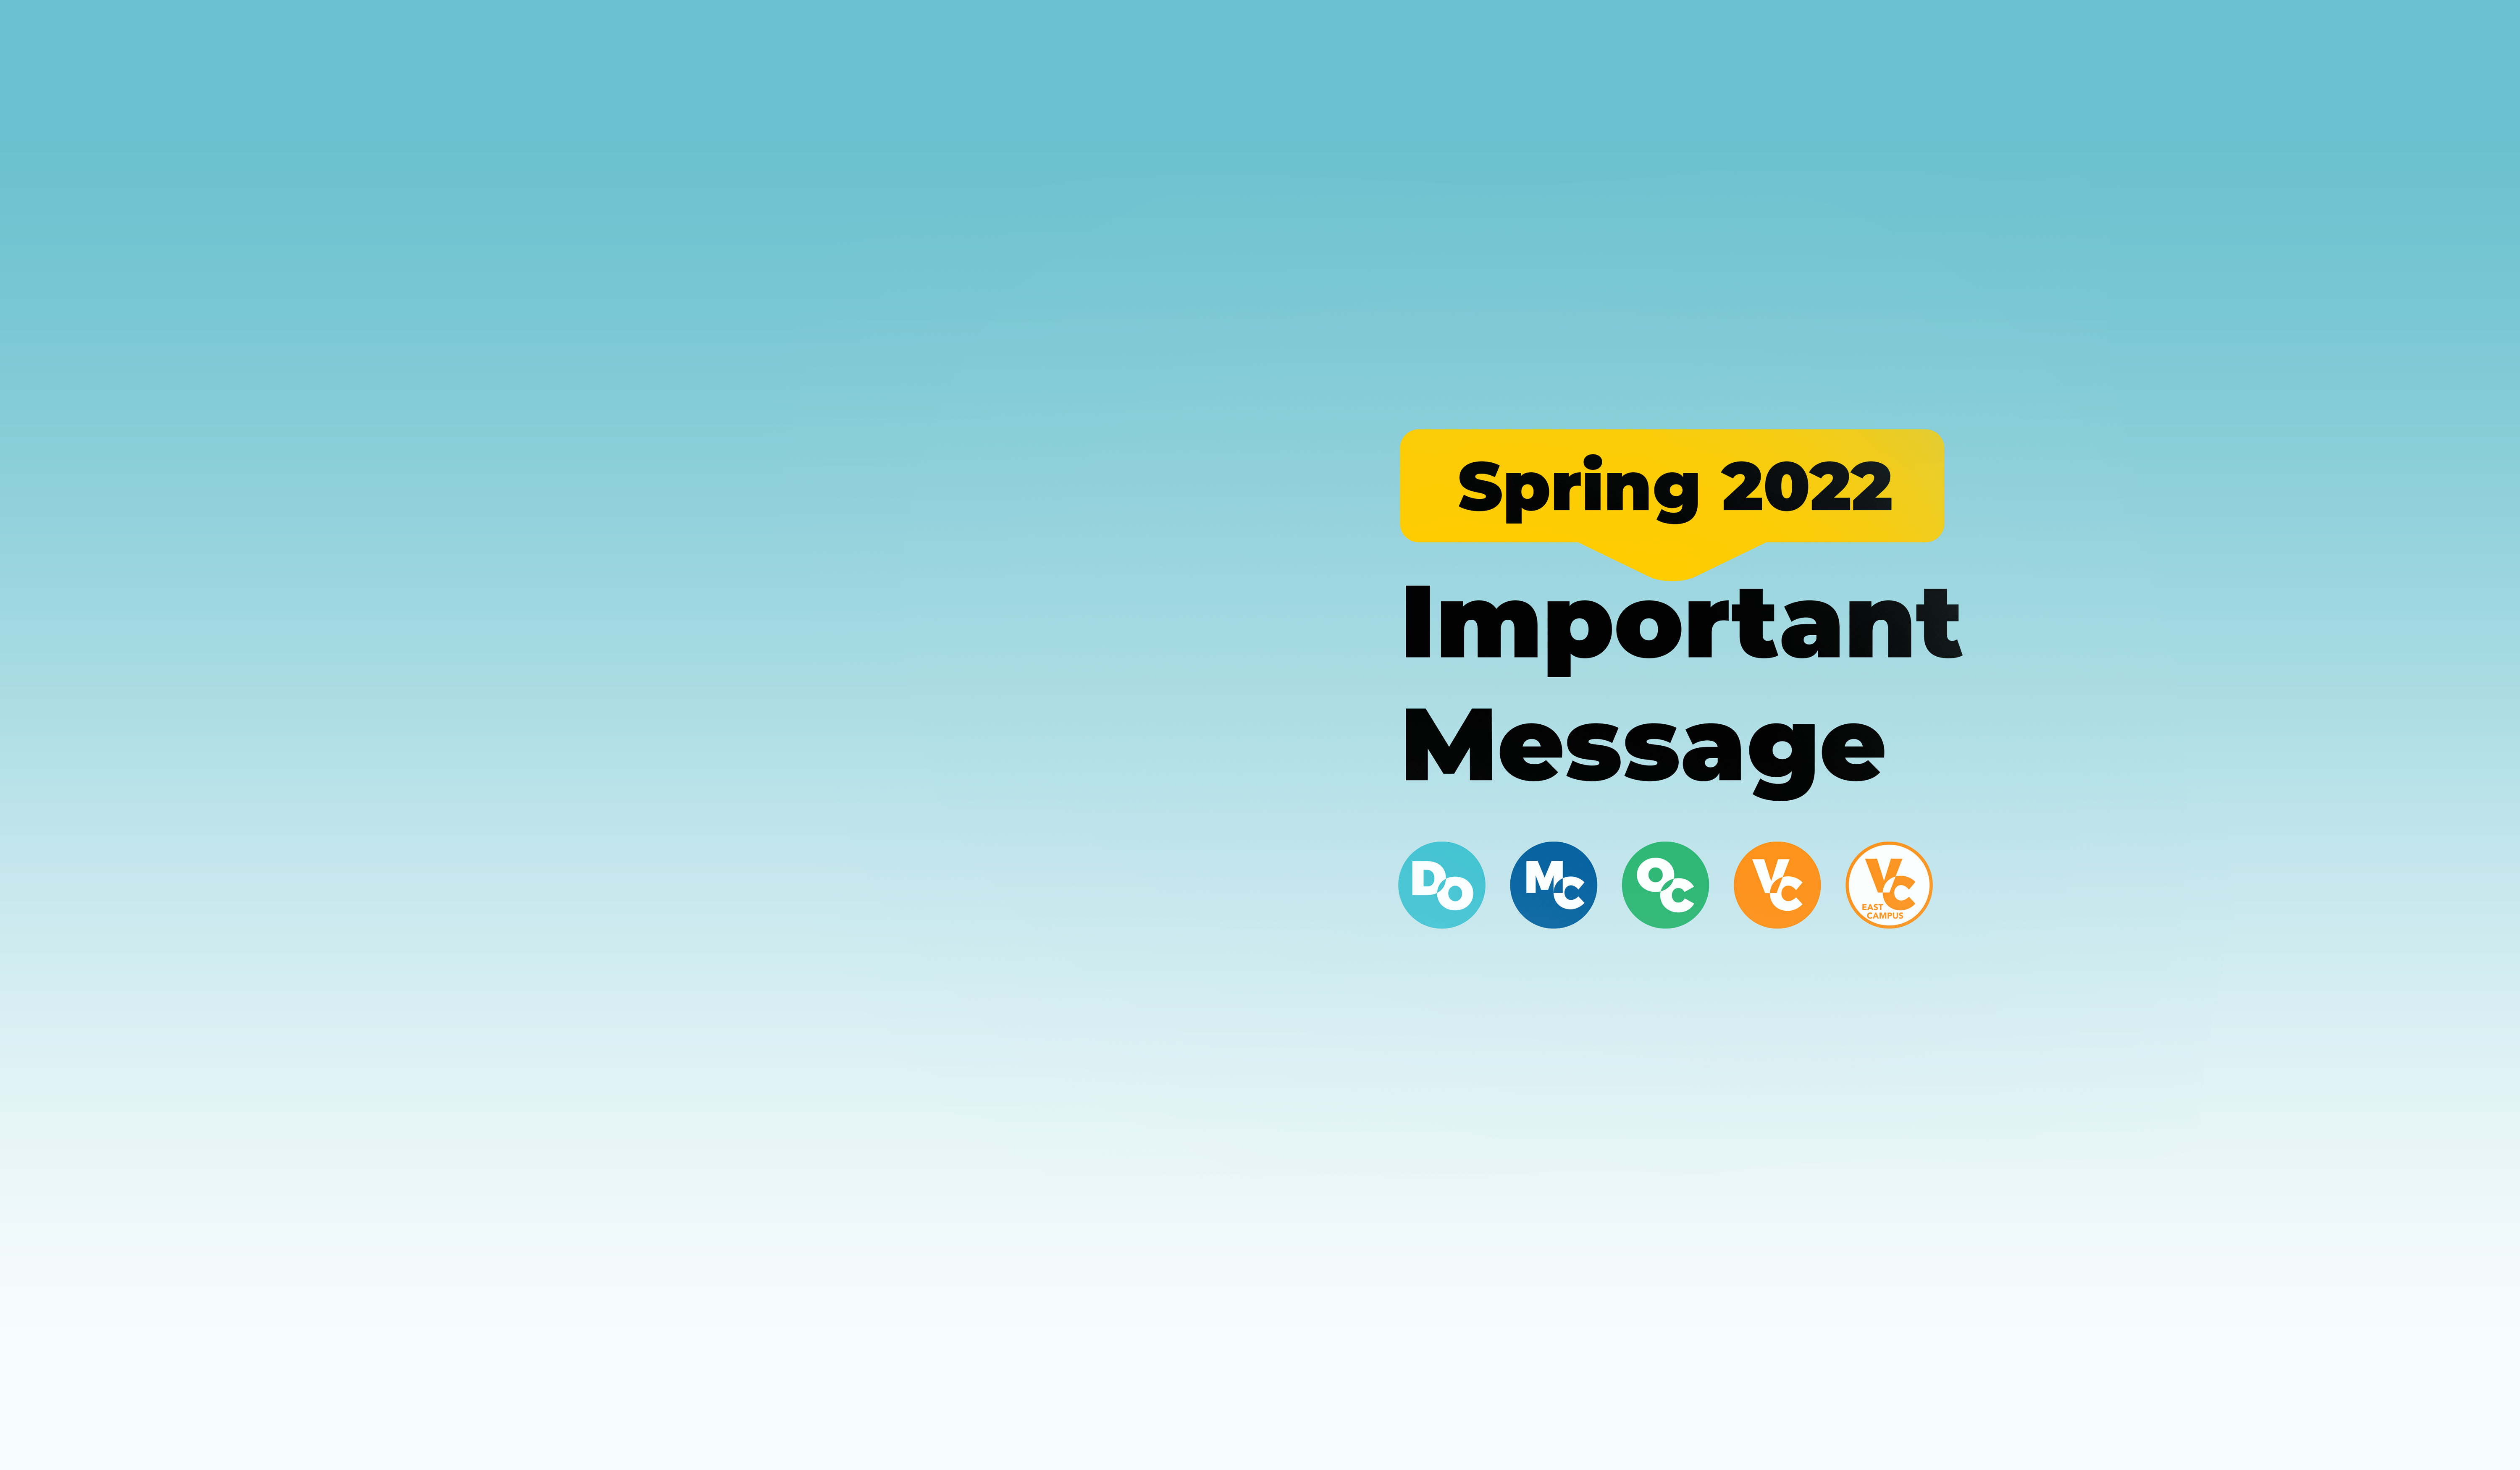 Spring 2022 Important Message